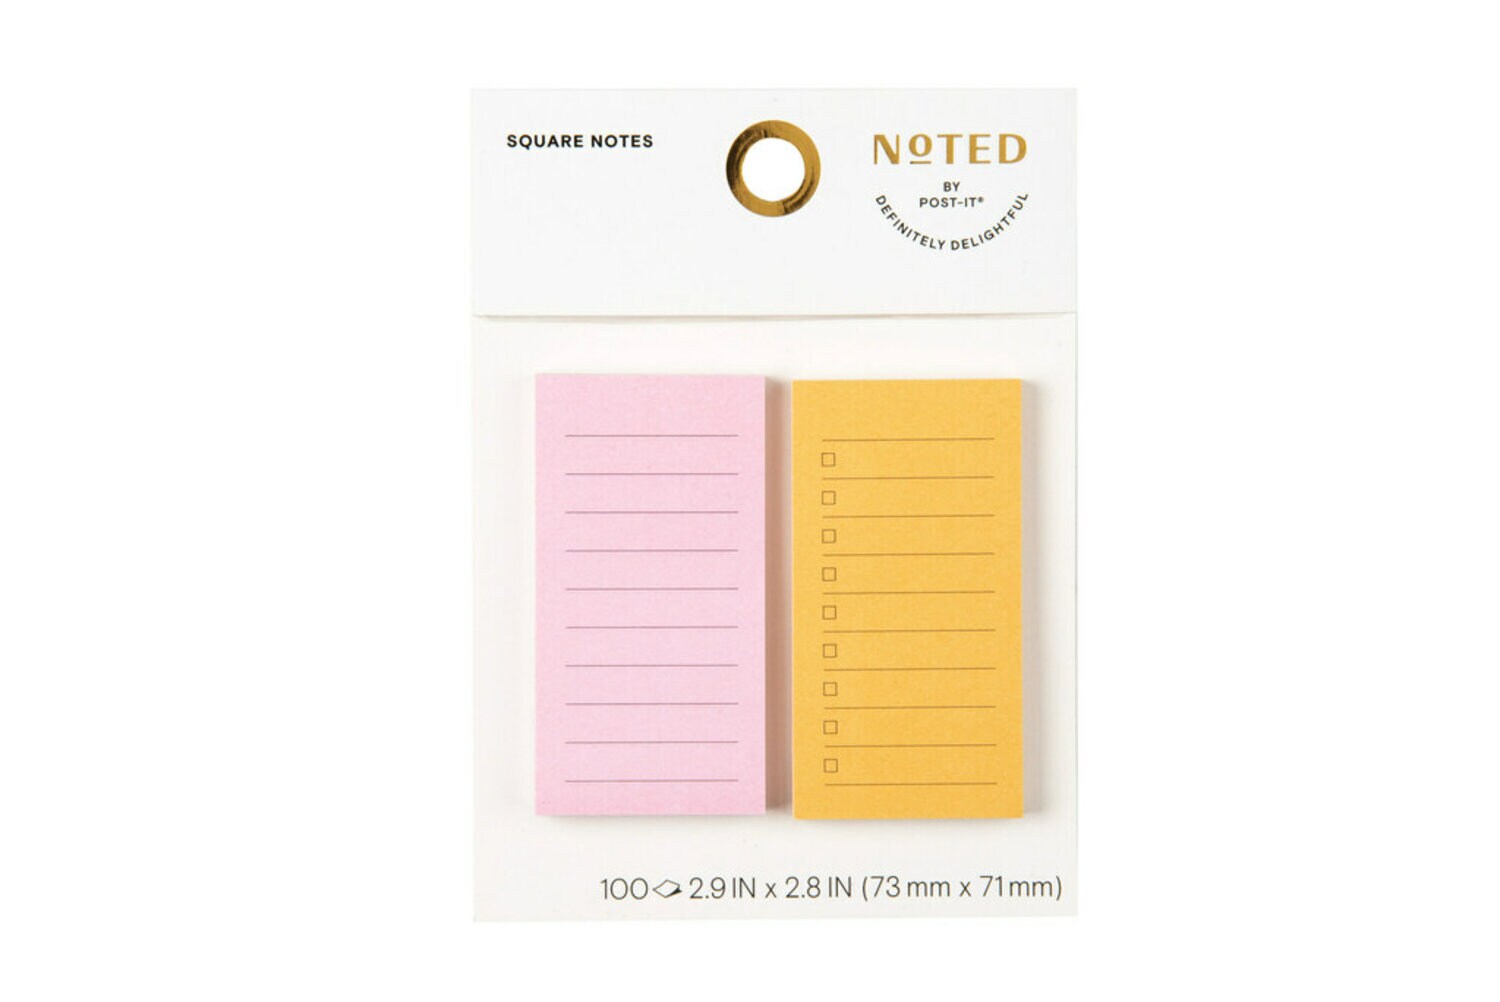 7100264565 - Post-it Printed Notes NTD5-DUO-WM, 1.4 in x 2.8 in (35 mm x 71 mm)